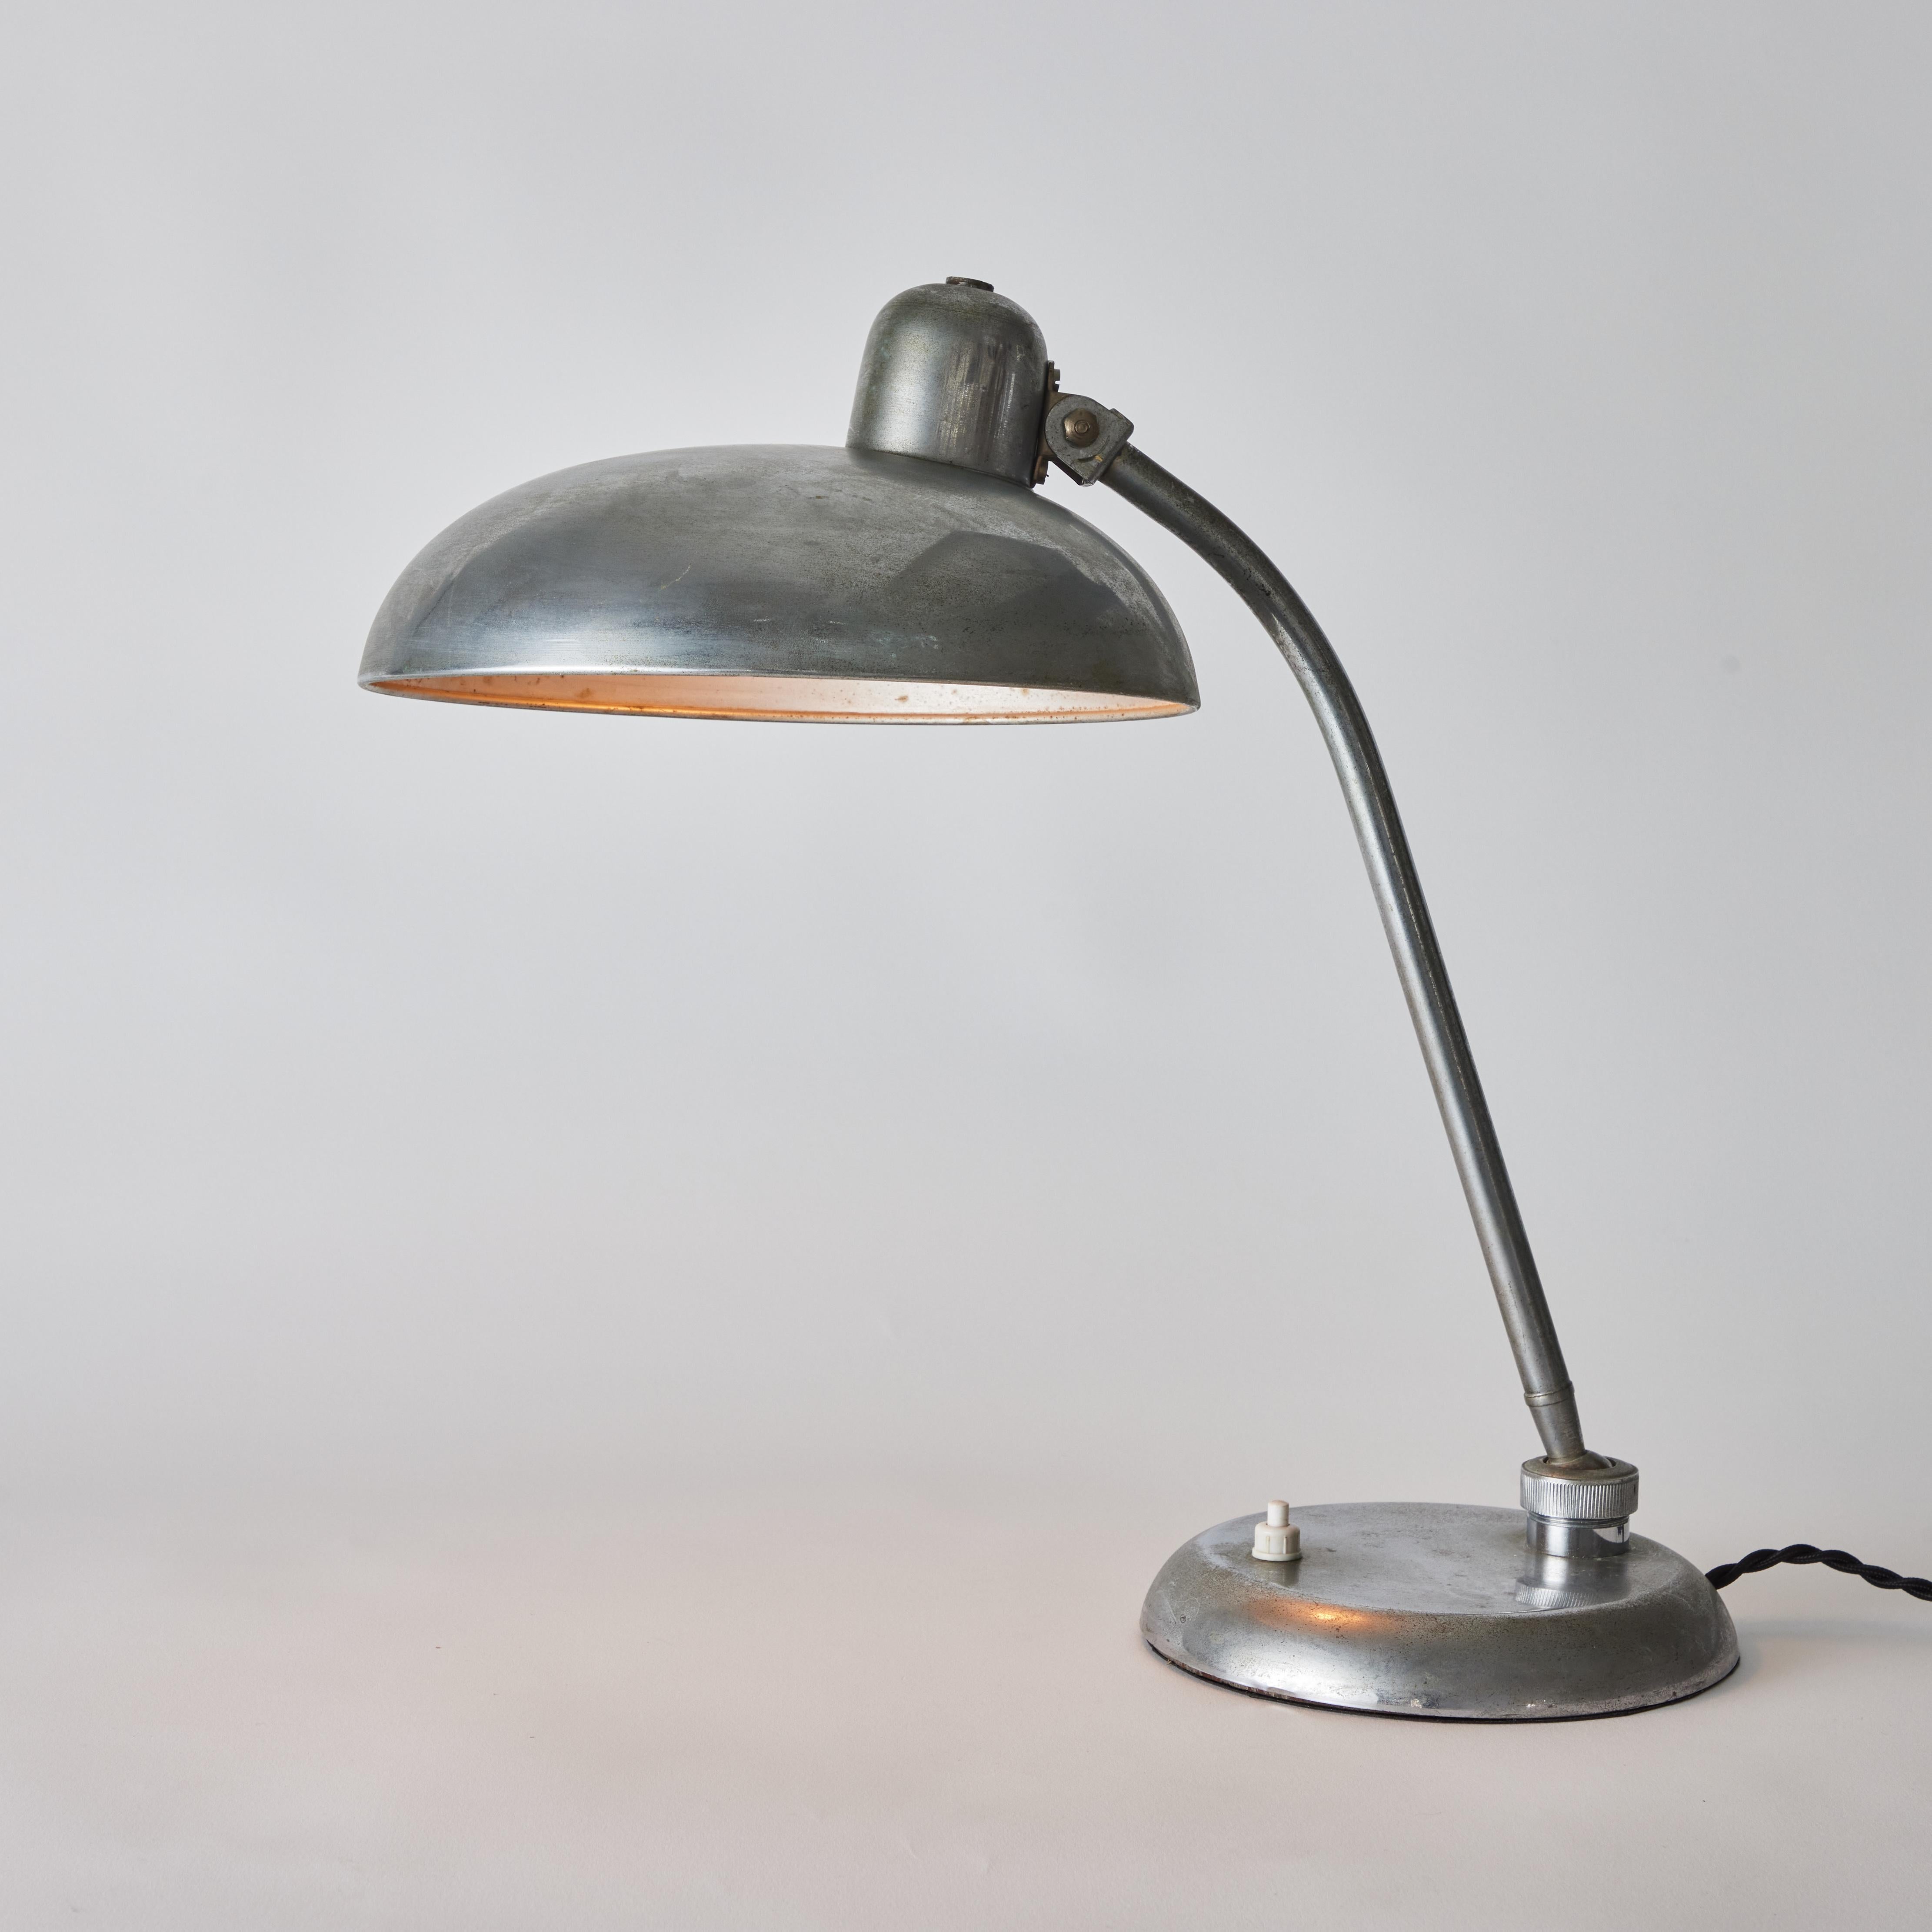 1940s Giovanni Michelucci Patinated Nickel Ministerial Table Lamp for Lariolux For Sale 3